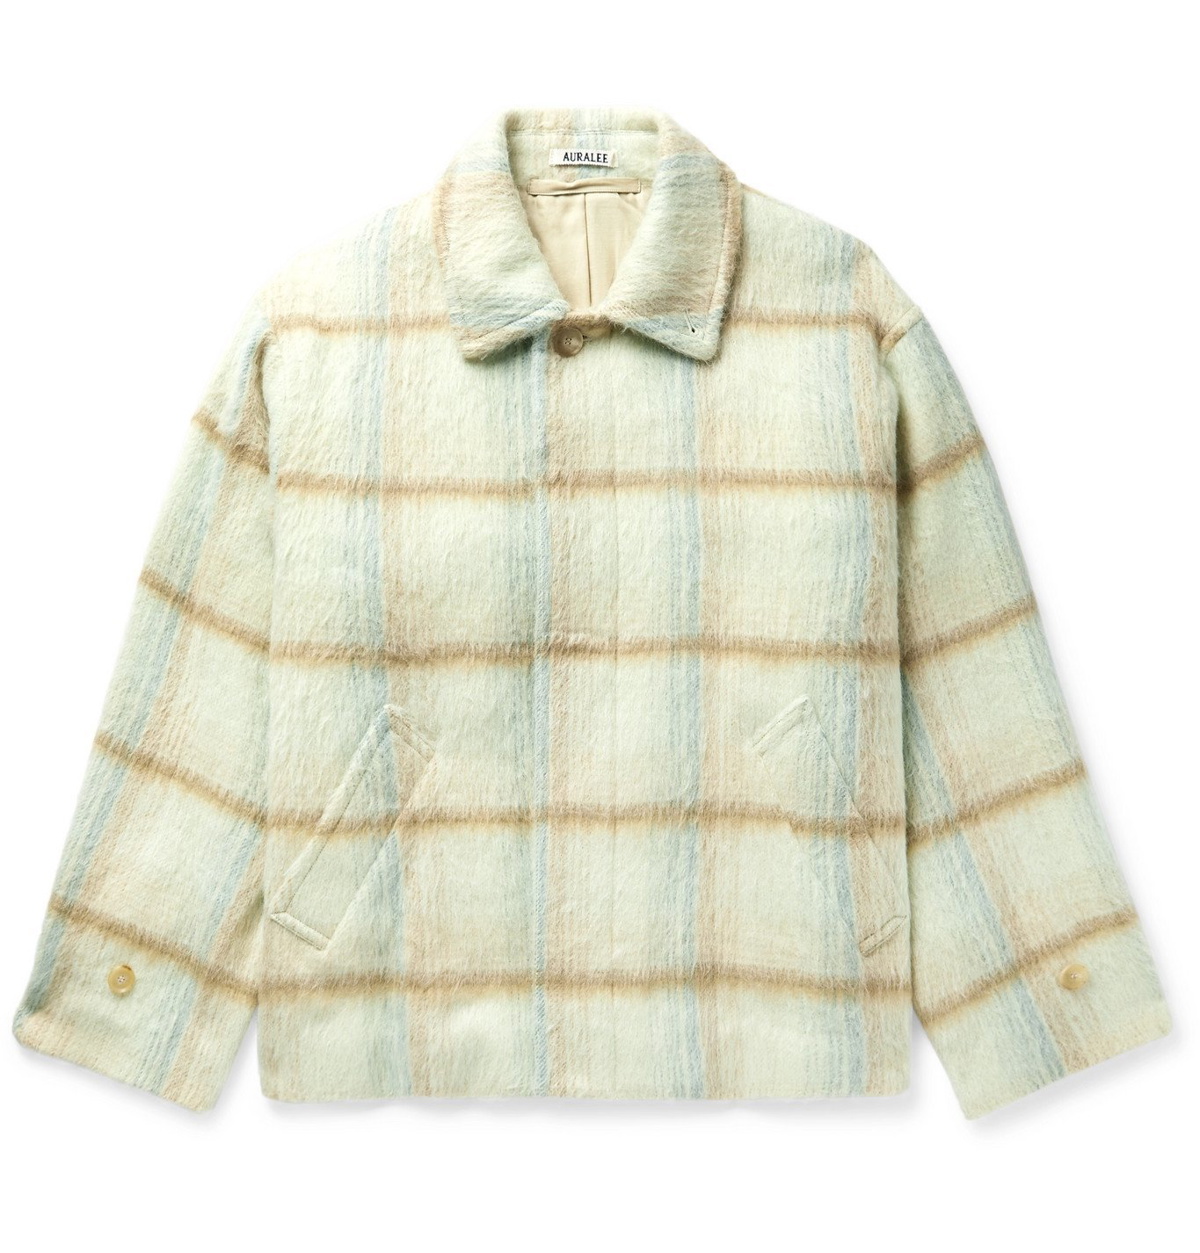 Auralee - Checked Brushed Wool and Alpaca-Blend Jacket - Neutrals